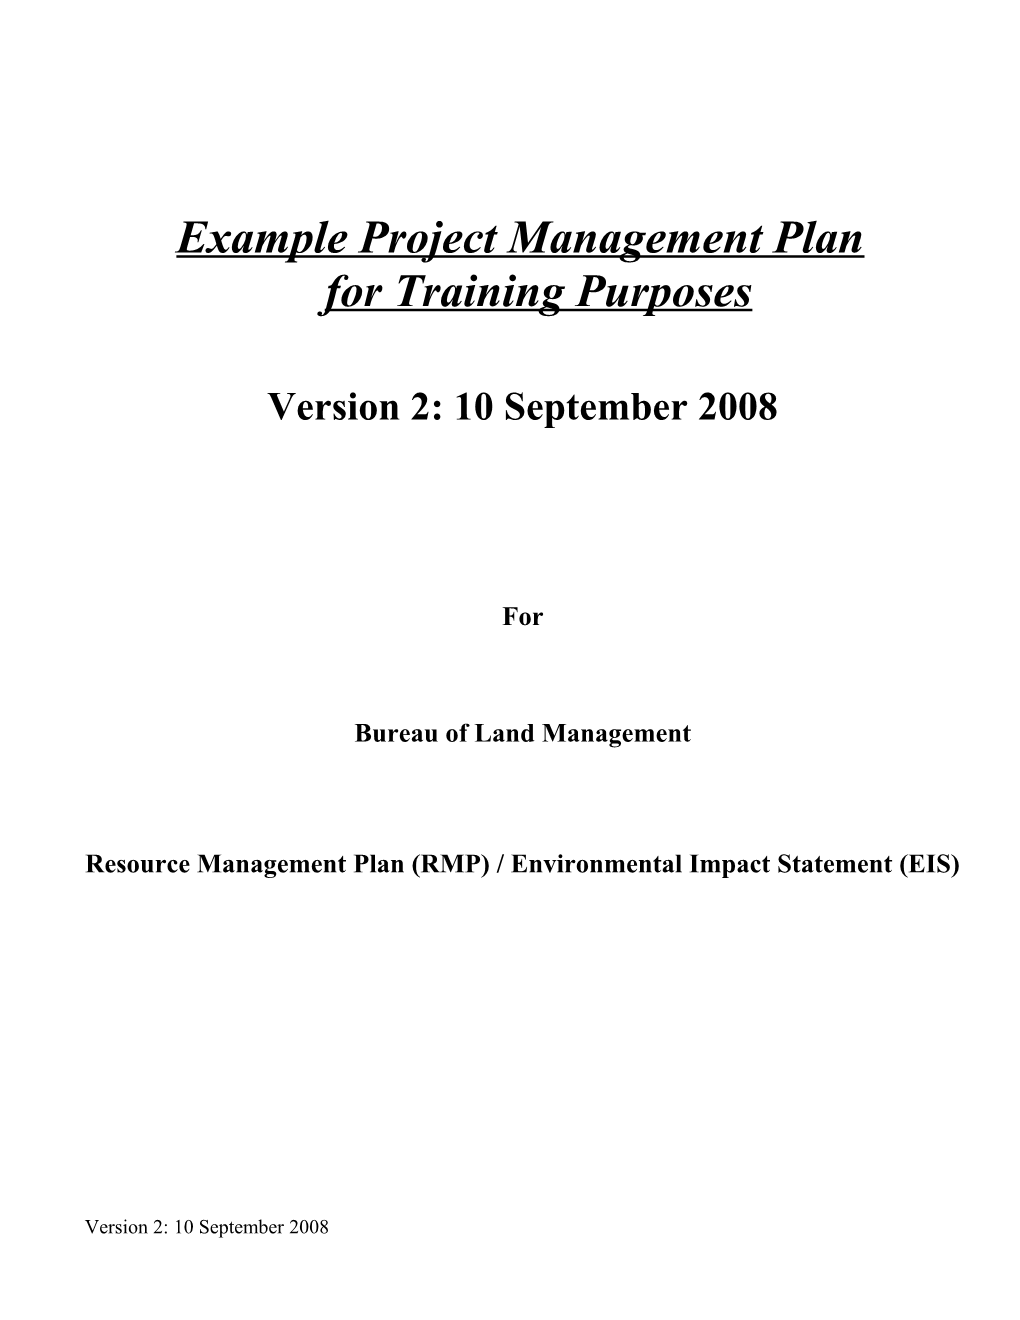 Example Project Management Planfor Training Purposes